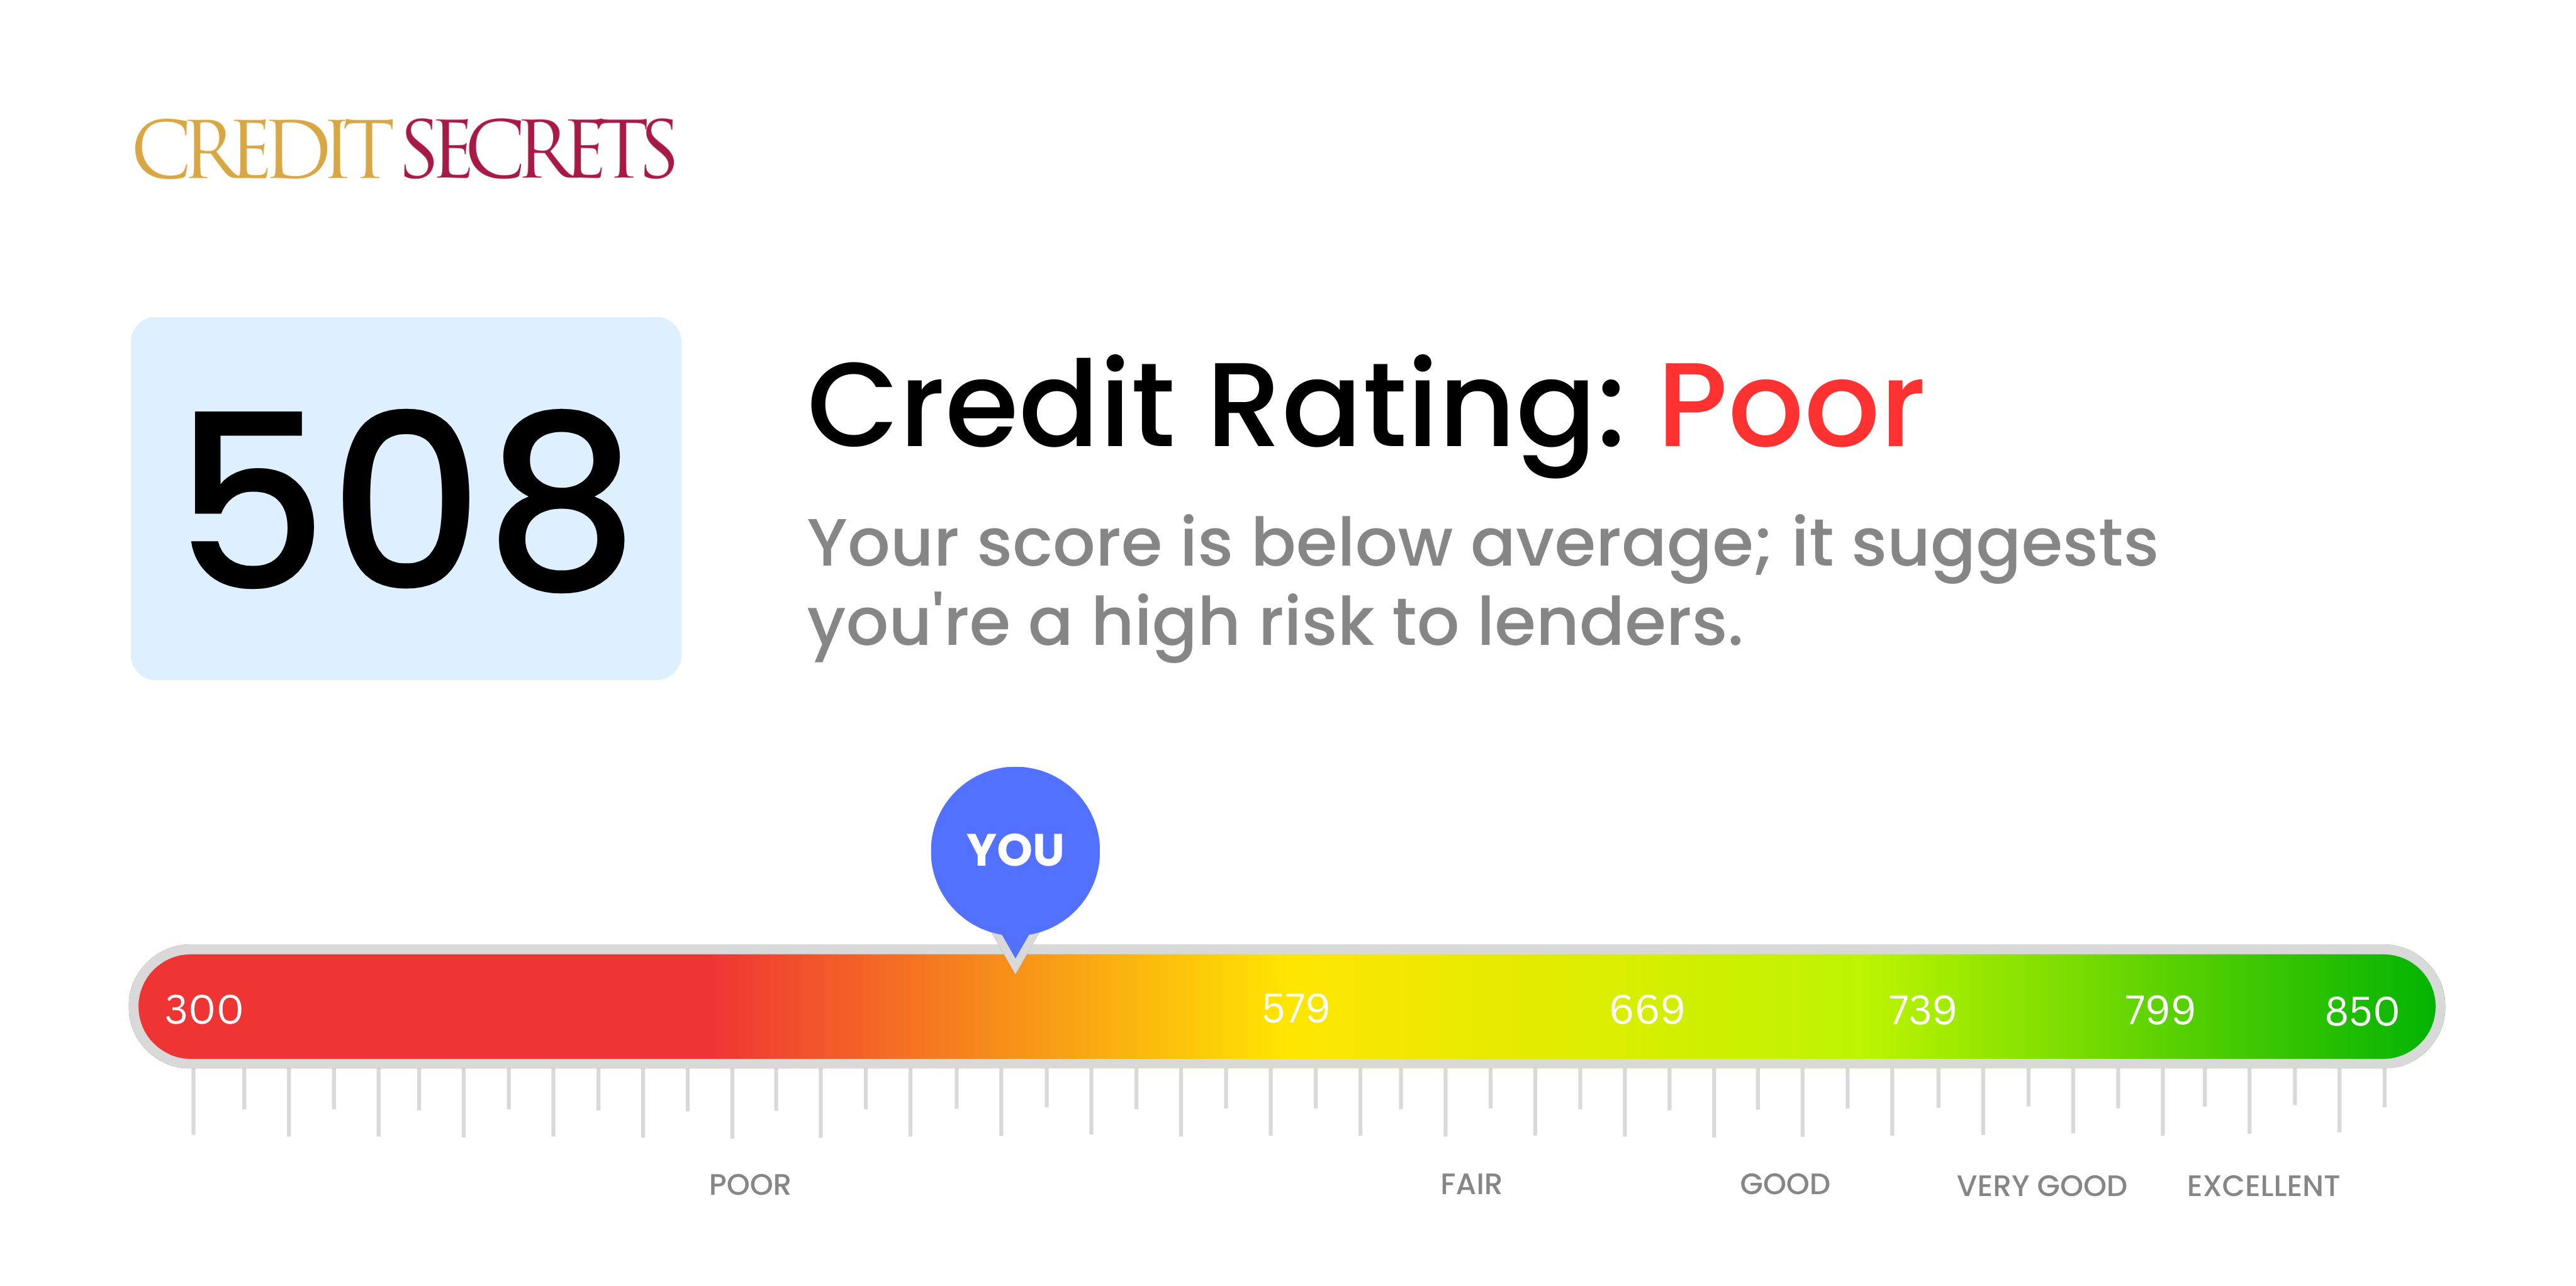 Is 508 a good credit score?